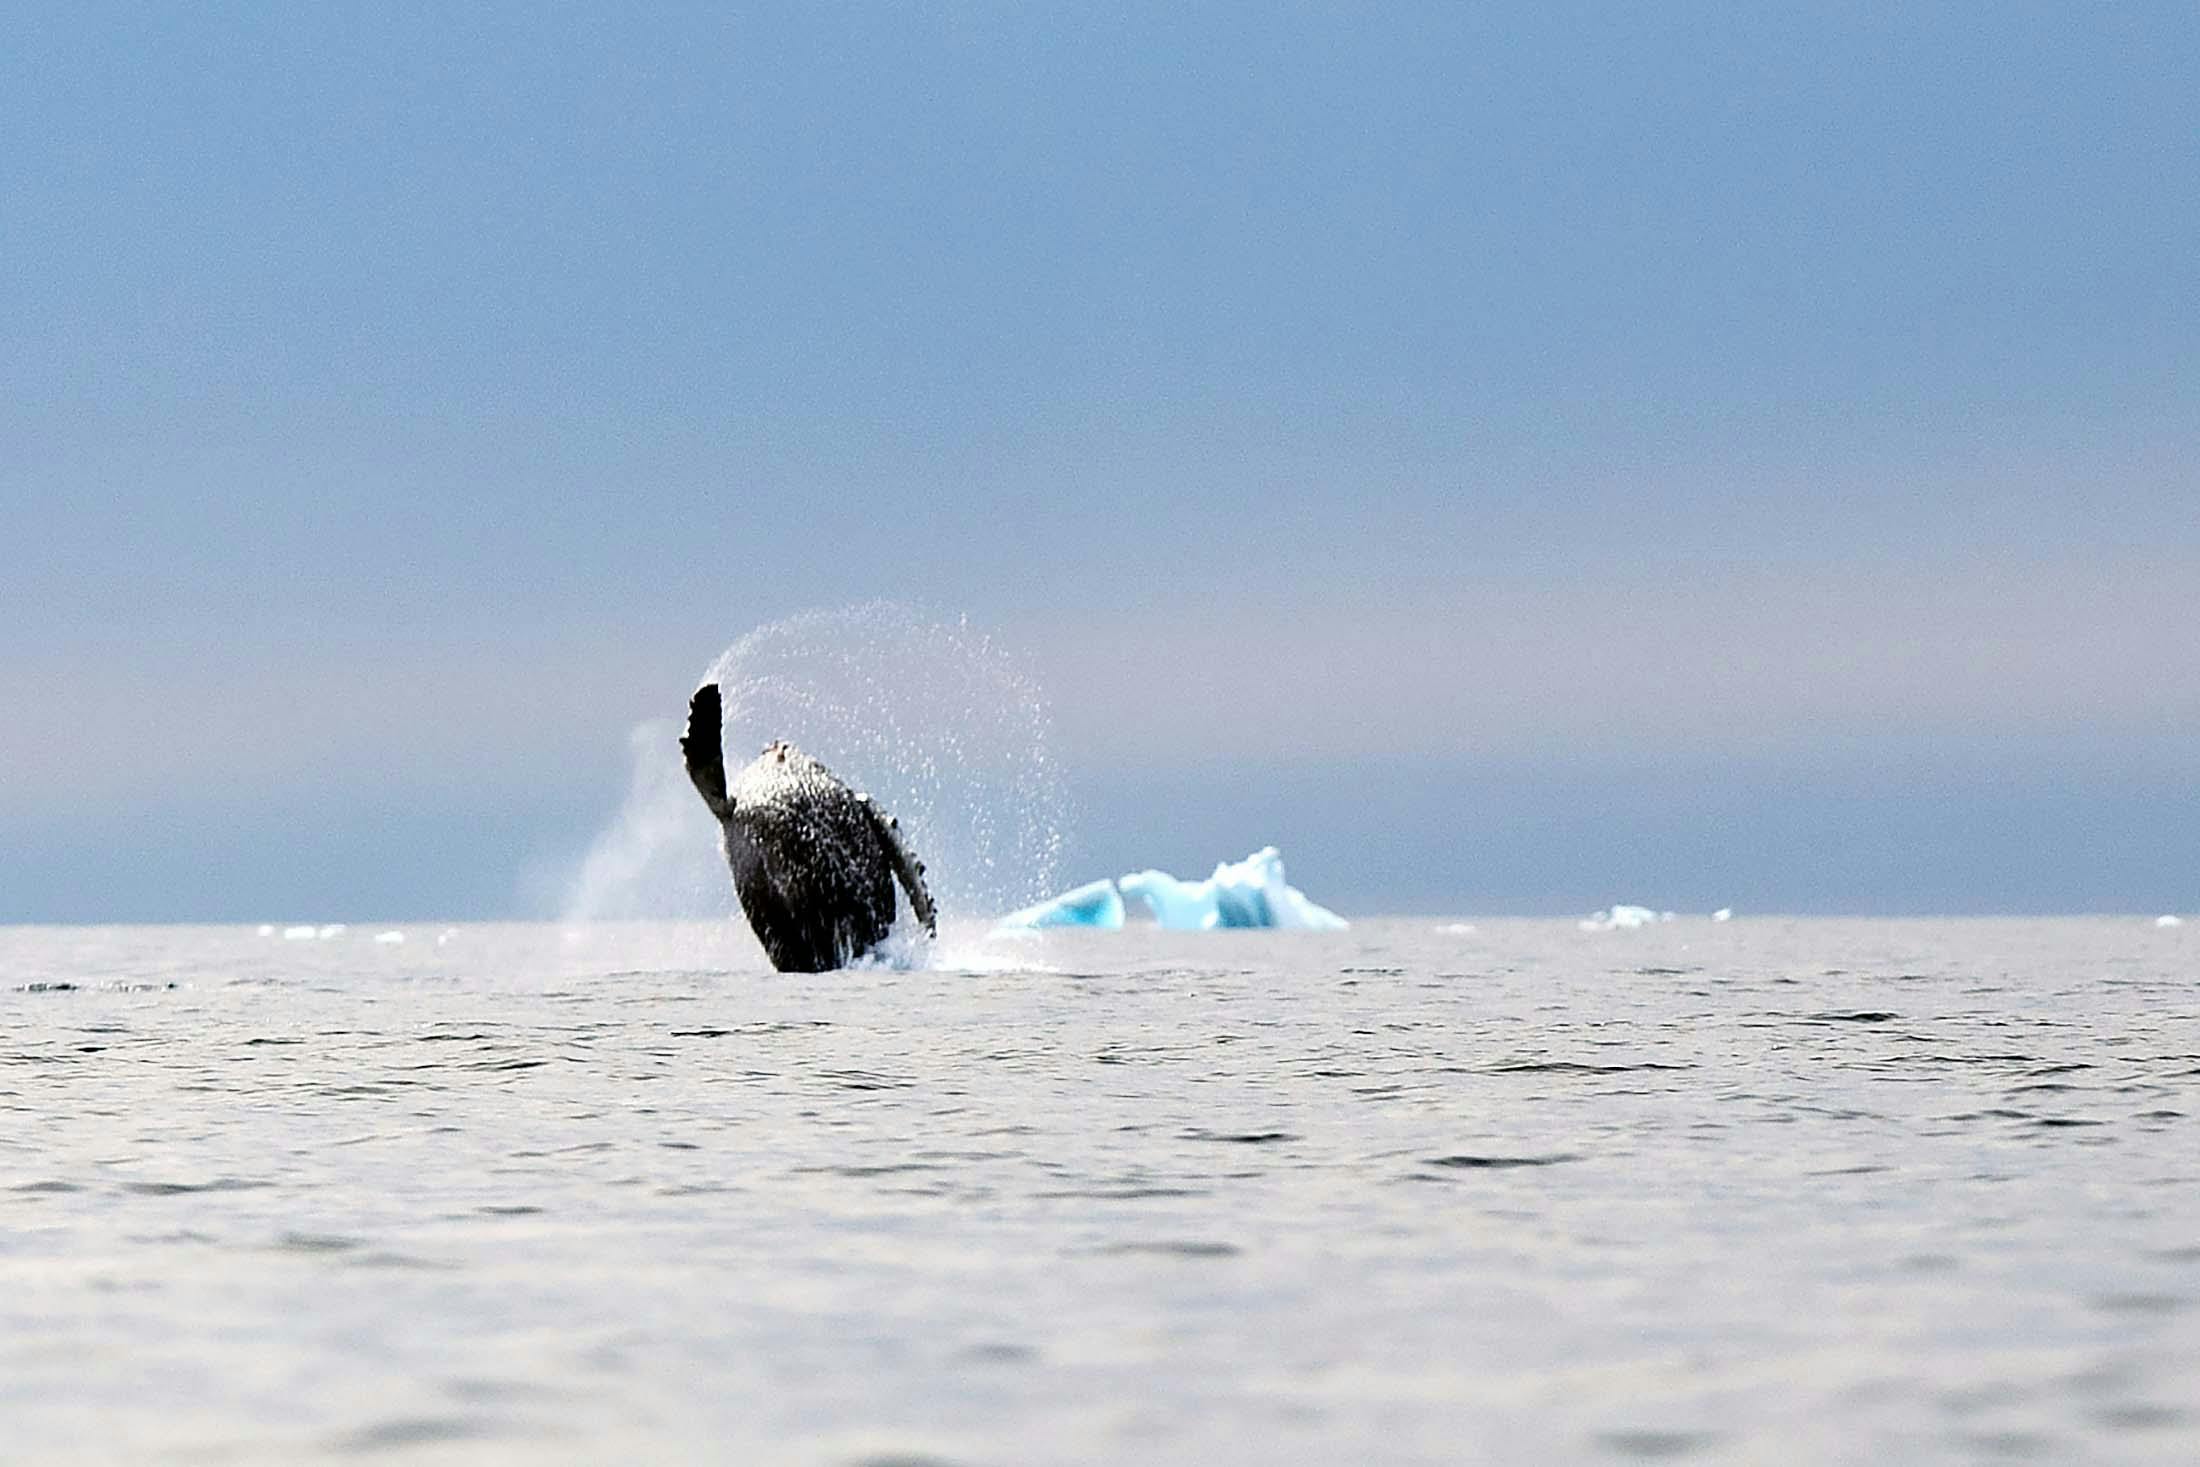 Spotted during an Antarctic expedition: a breaching humpback whale in Cierva Cove, Antarctica